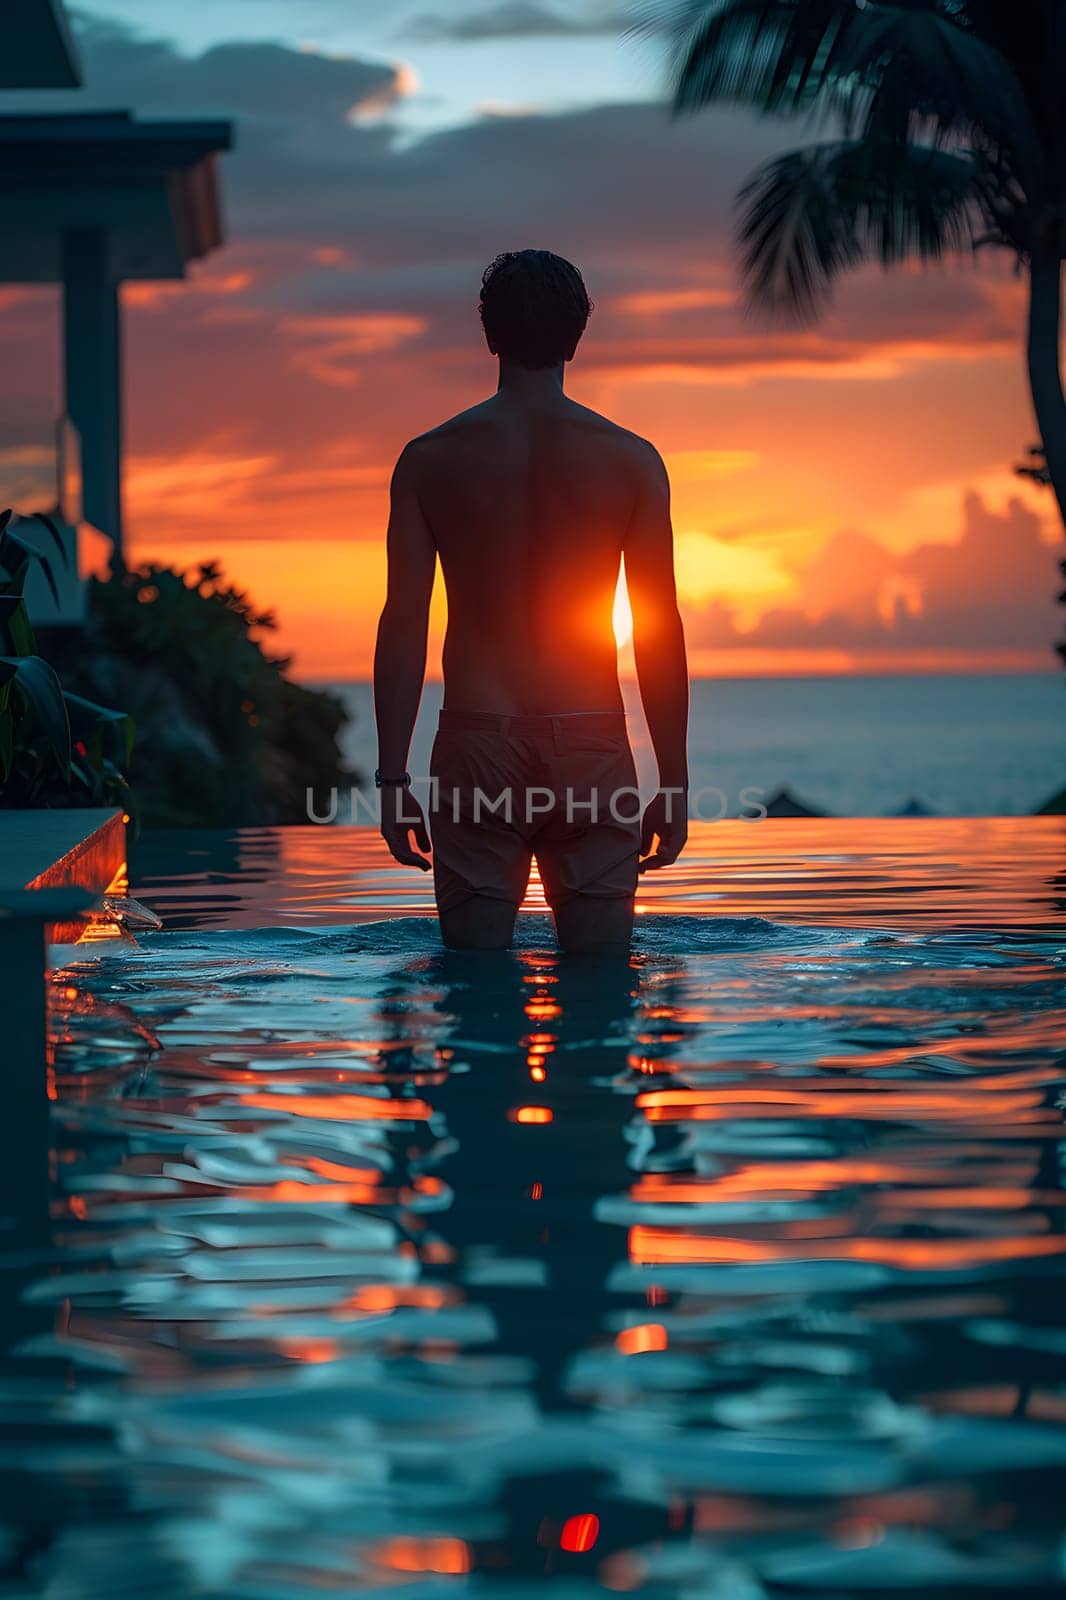 Man stands in water at sunset, under orange sky and afterglow by Nadtochiy